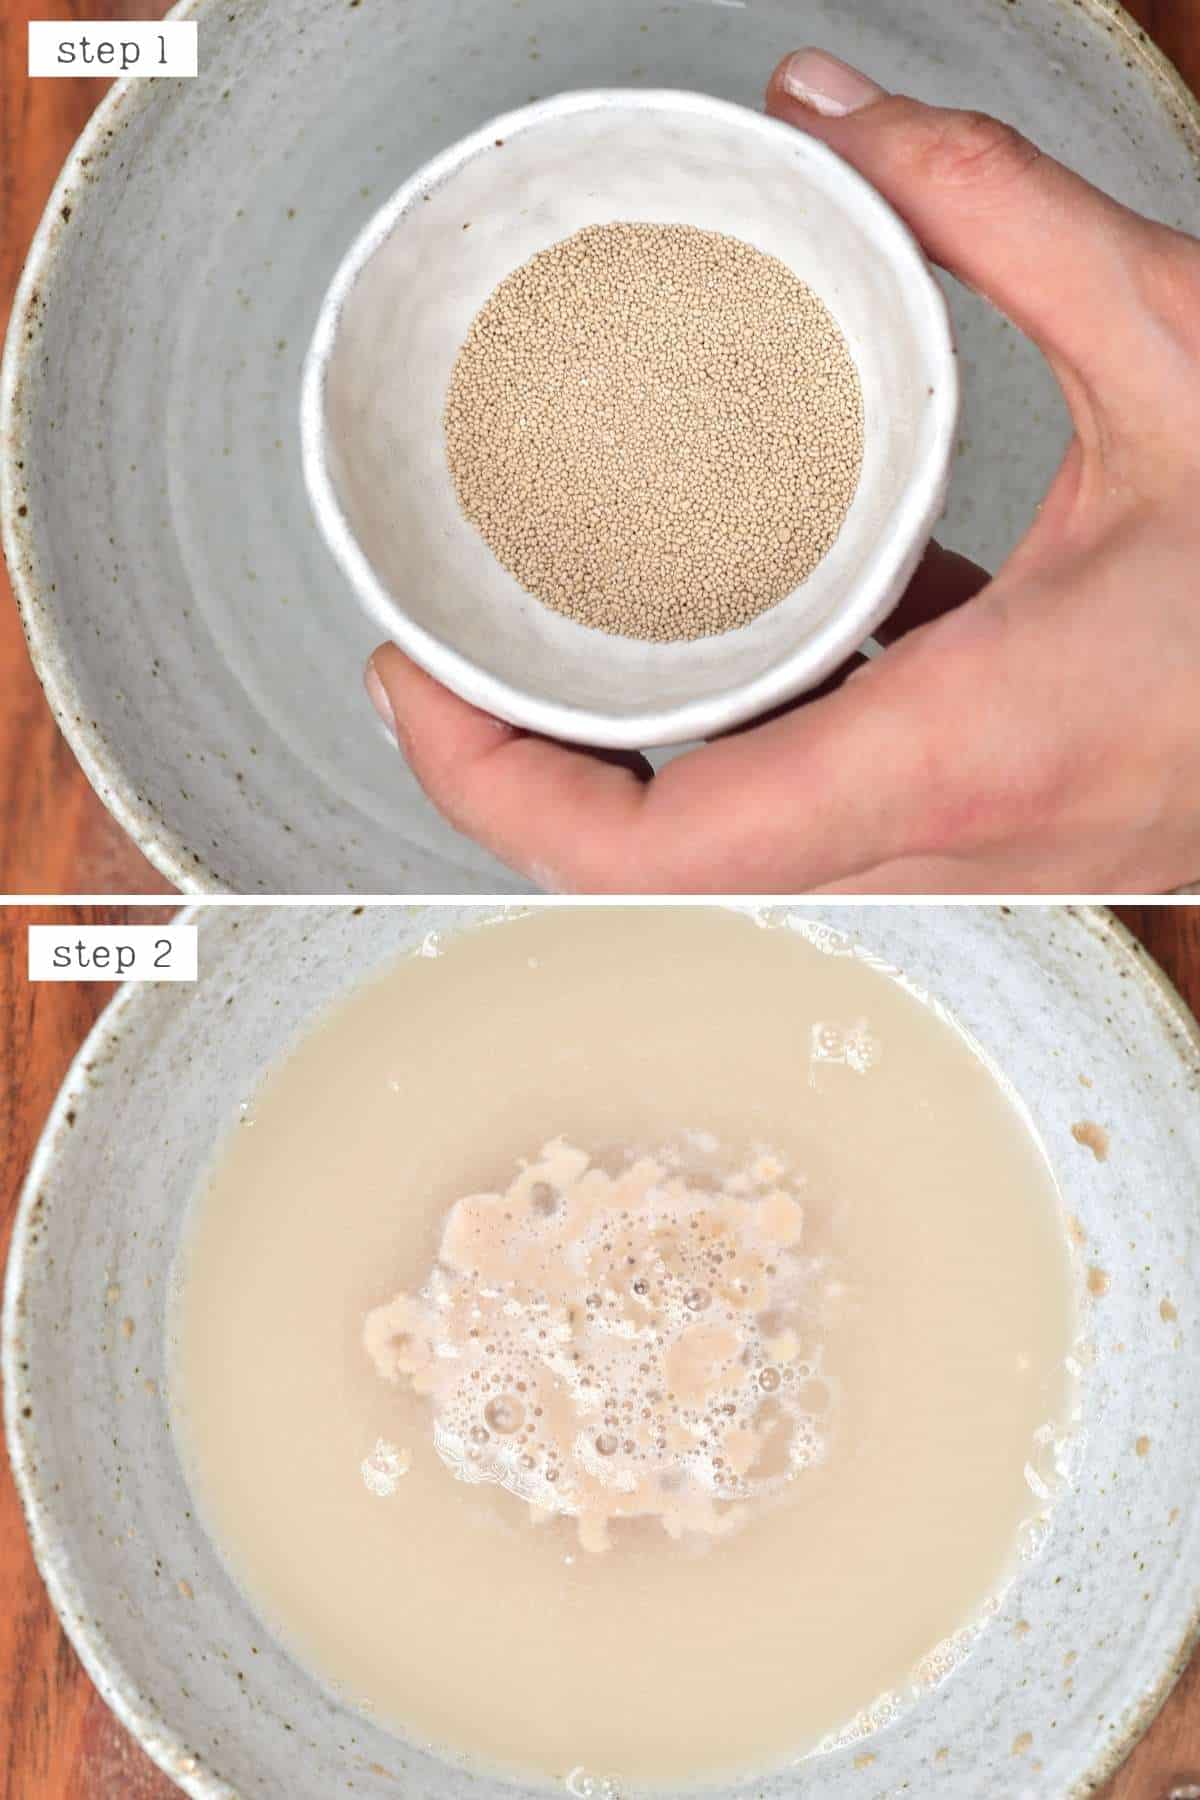 Steps for activating dry yeast